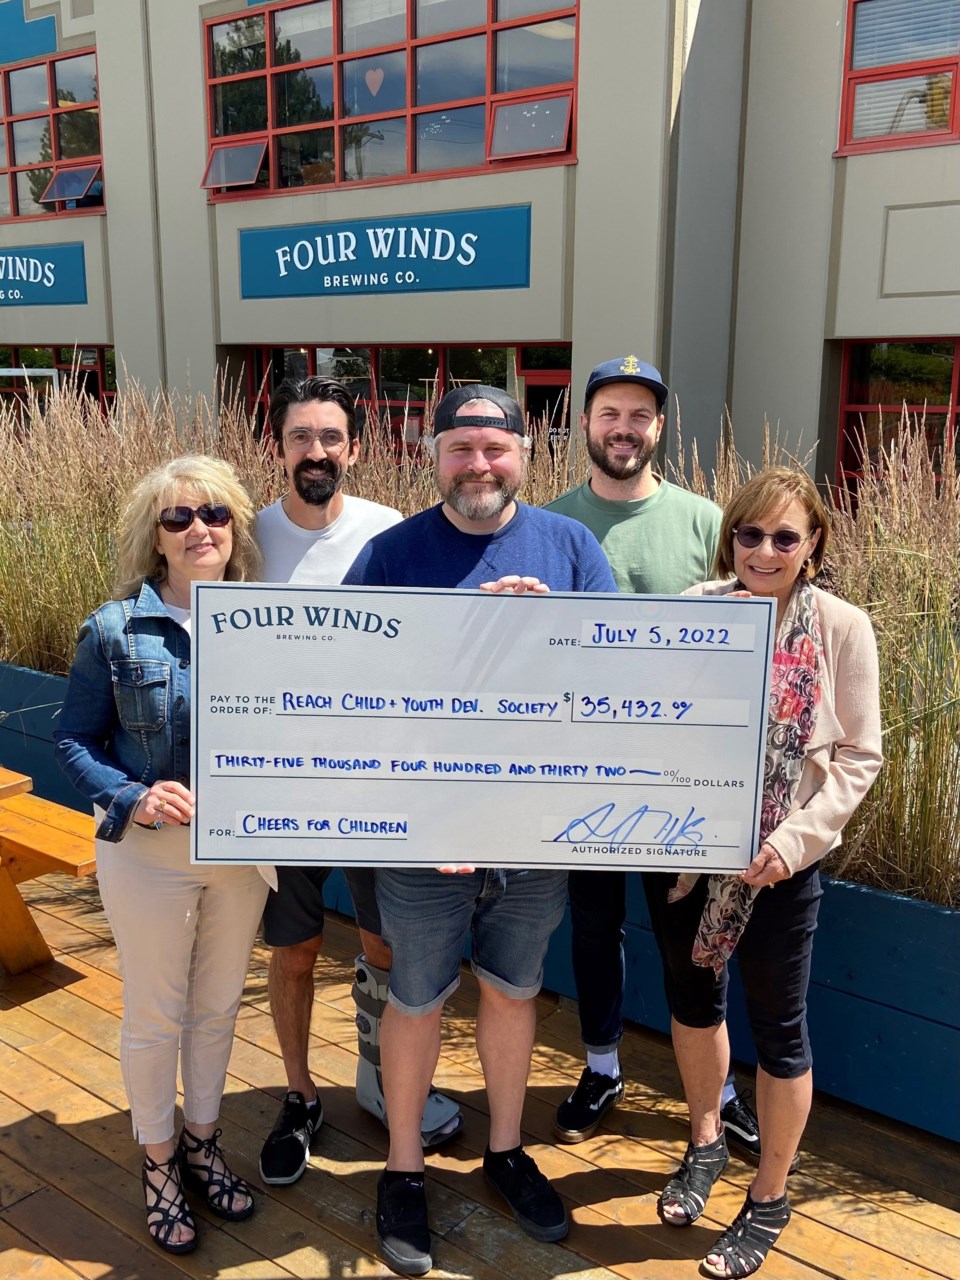 Four winds cheque photo